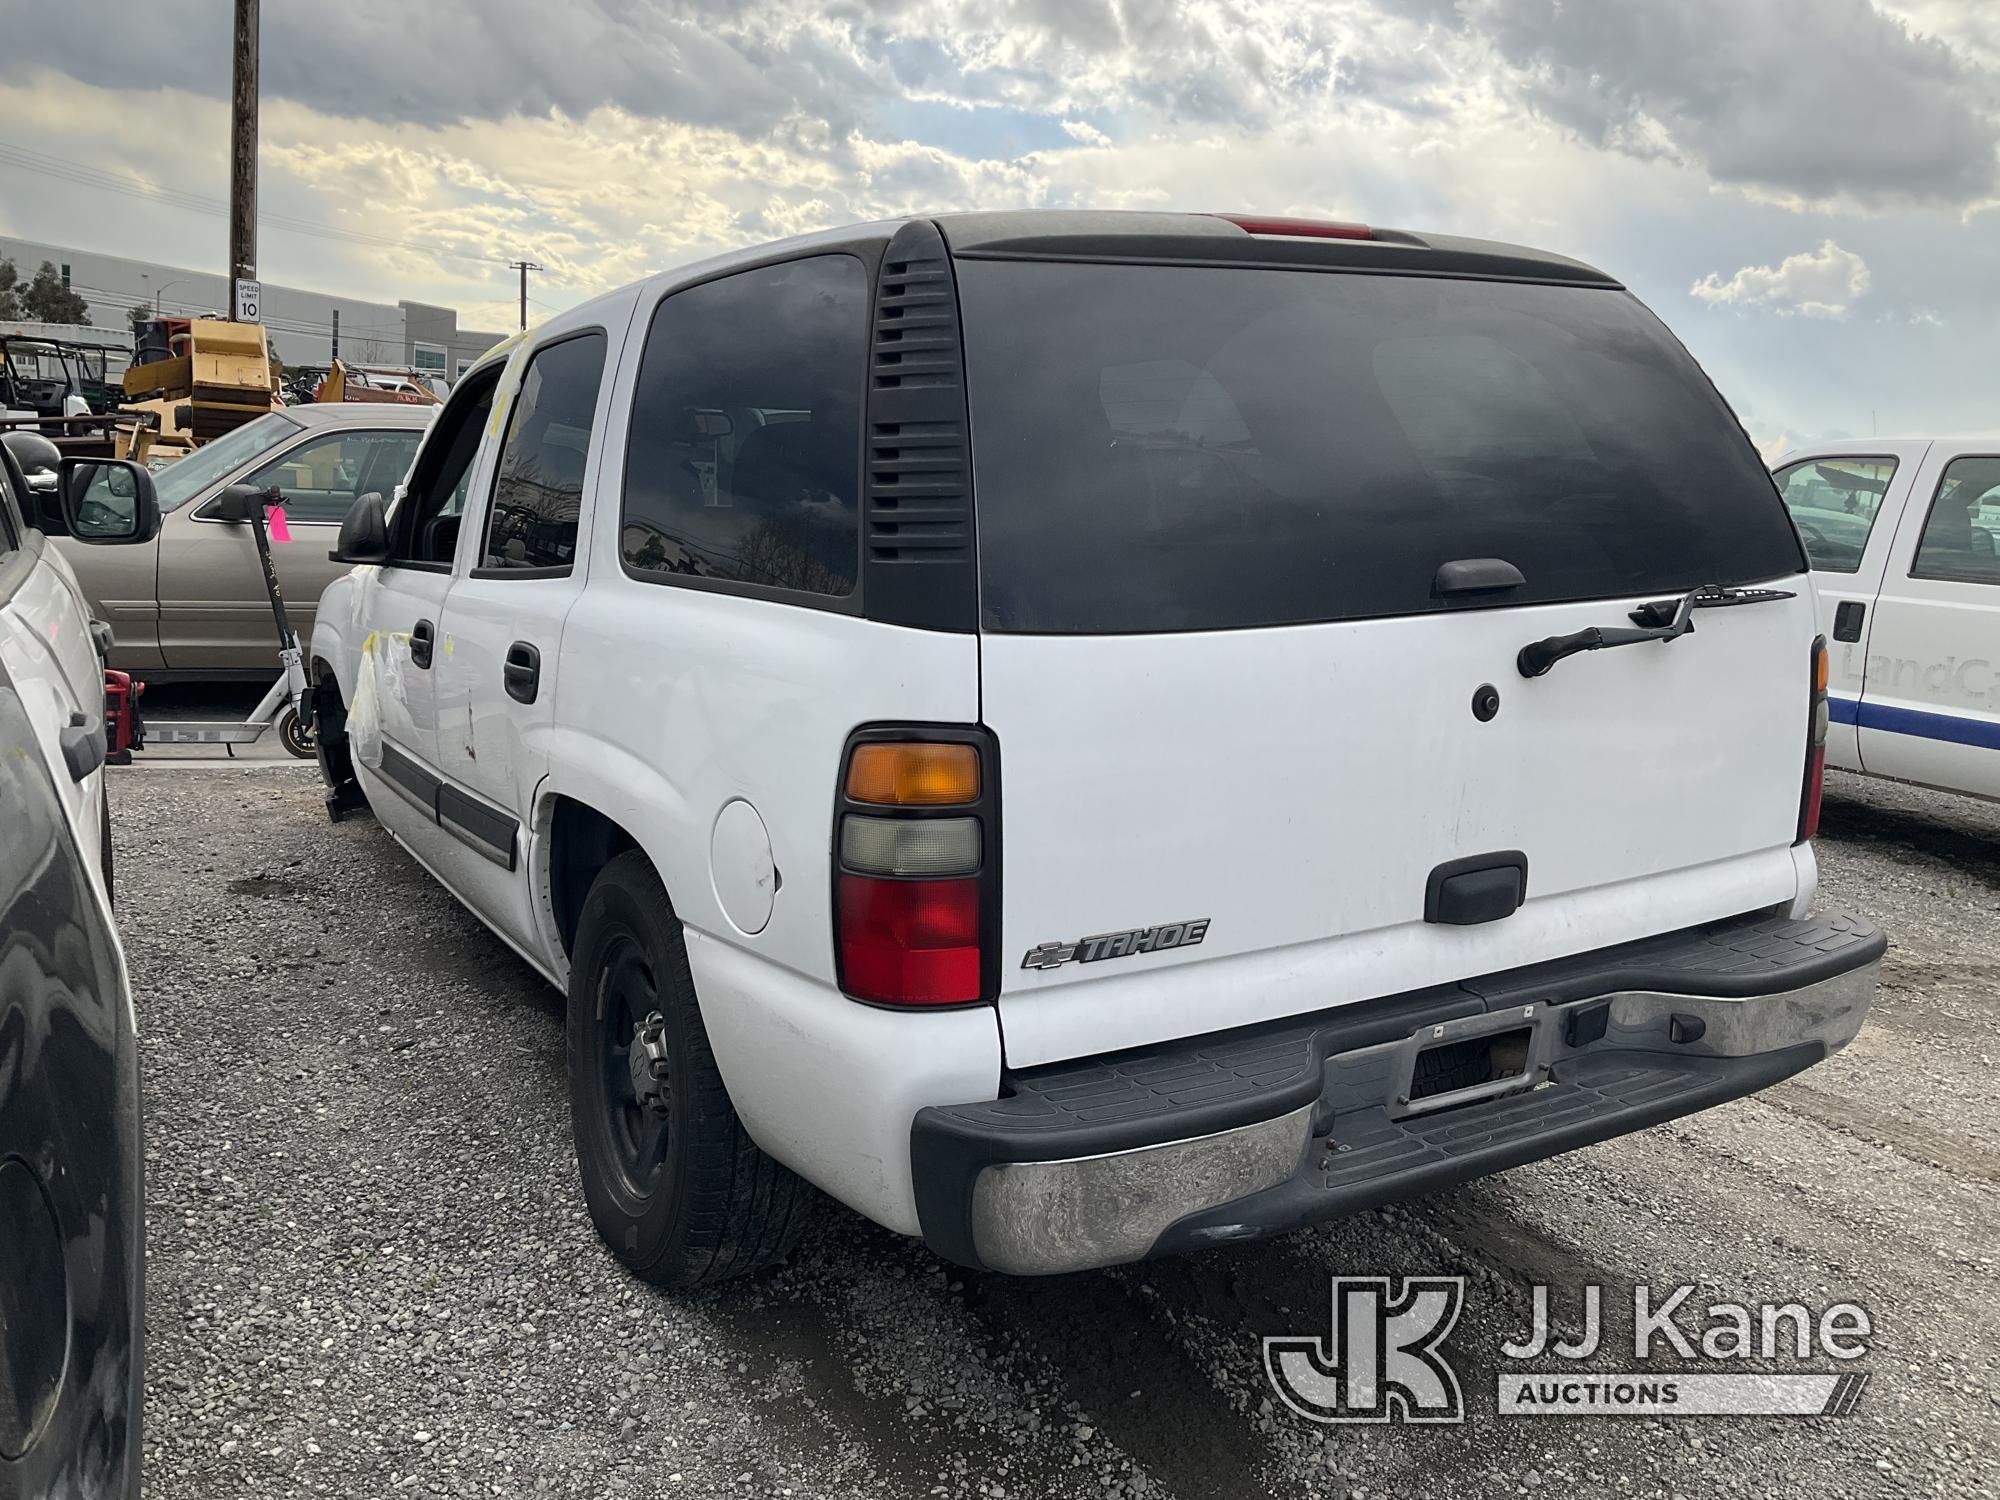 (Jurupa Valley, CA) 2006 Chevrolet Tahoe Sport Utility Vehicle Runs, Does Not Move Damaged Front Bum